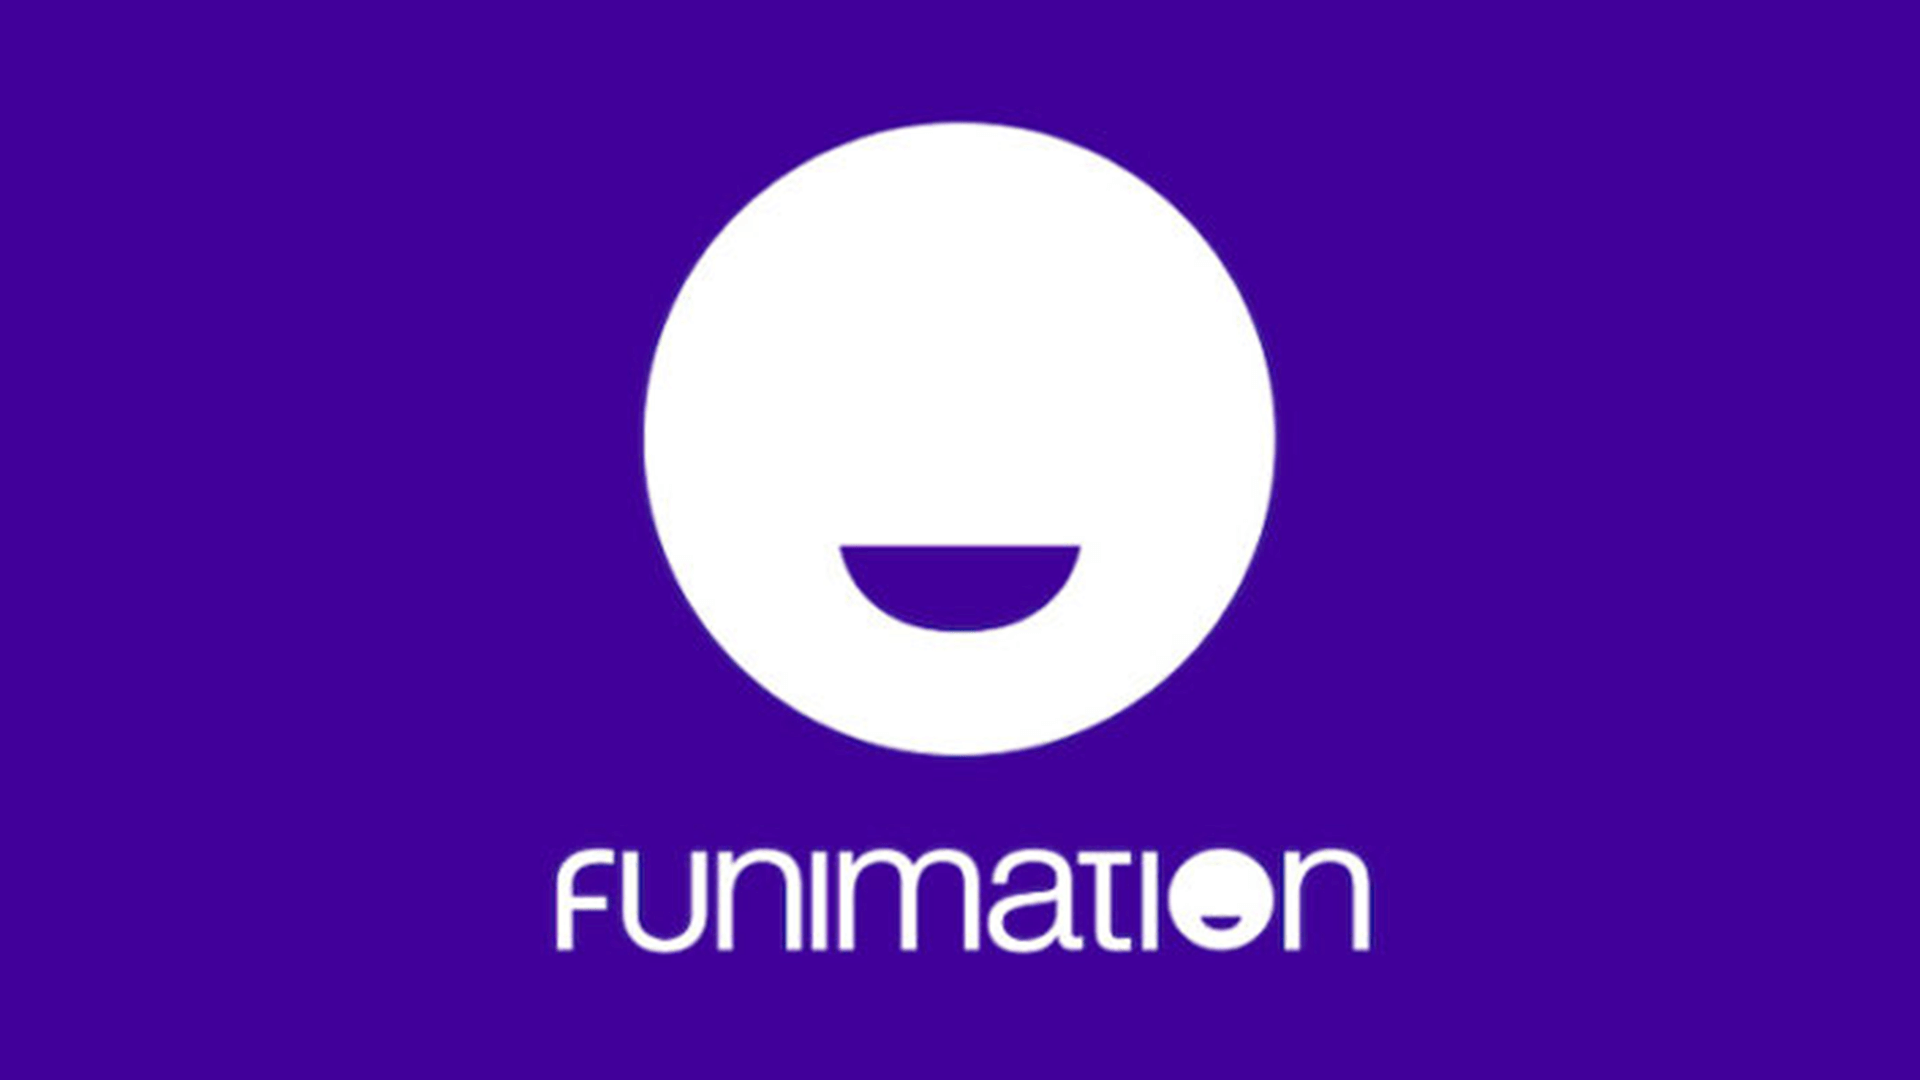 Funimation Will Be A Launch App On Xbox Series X/S